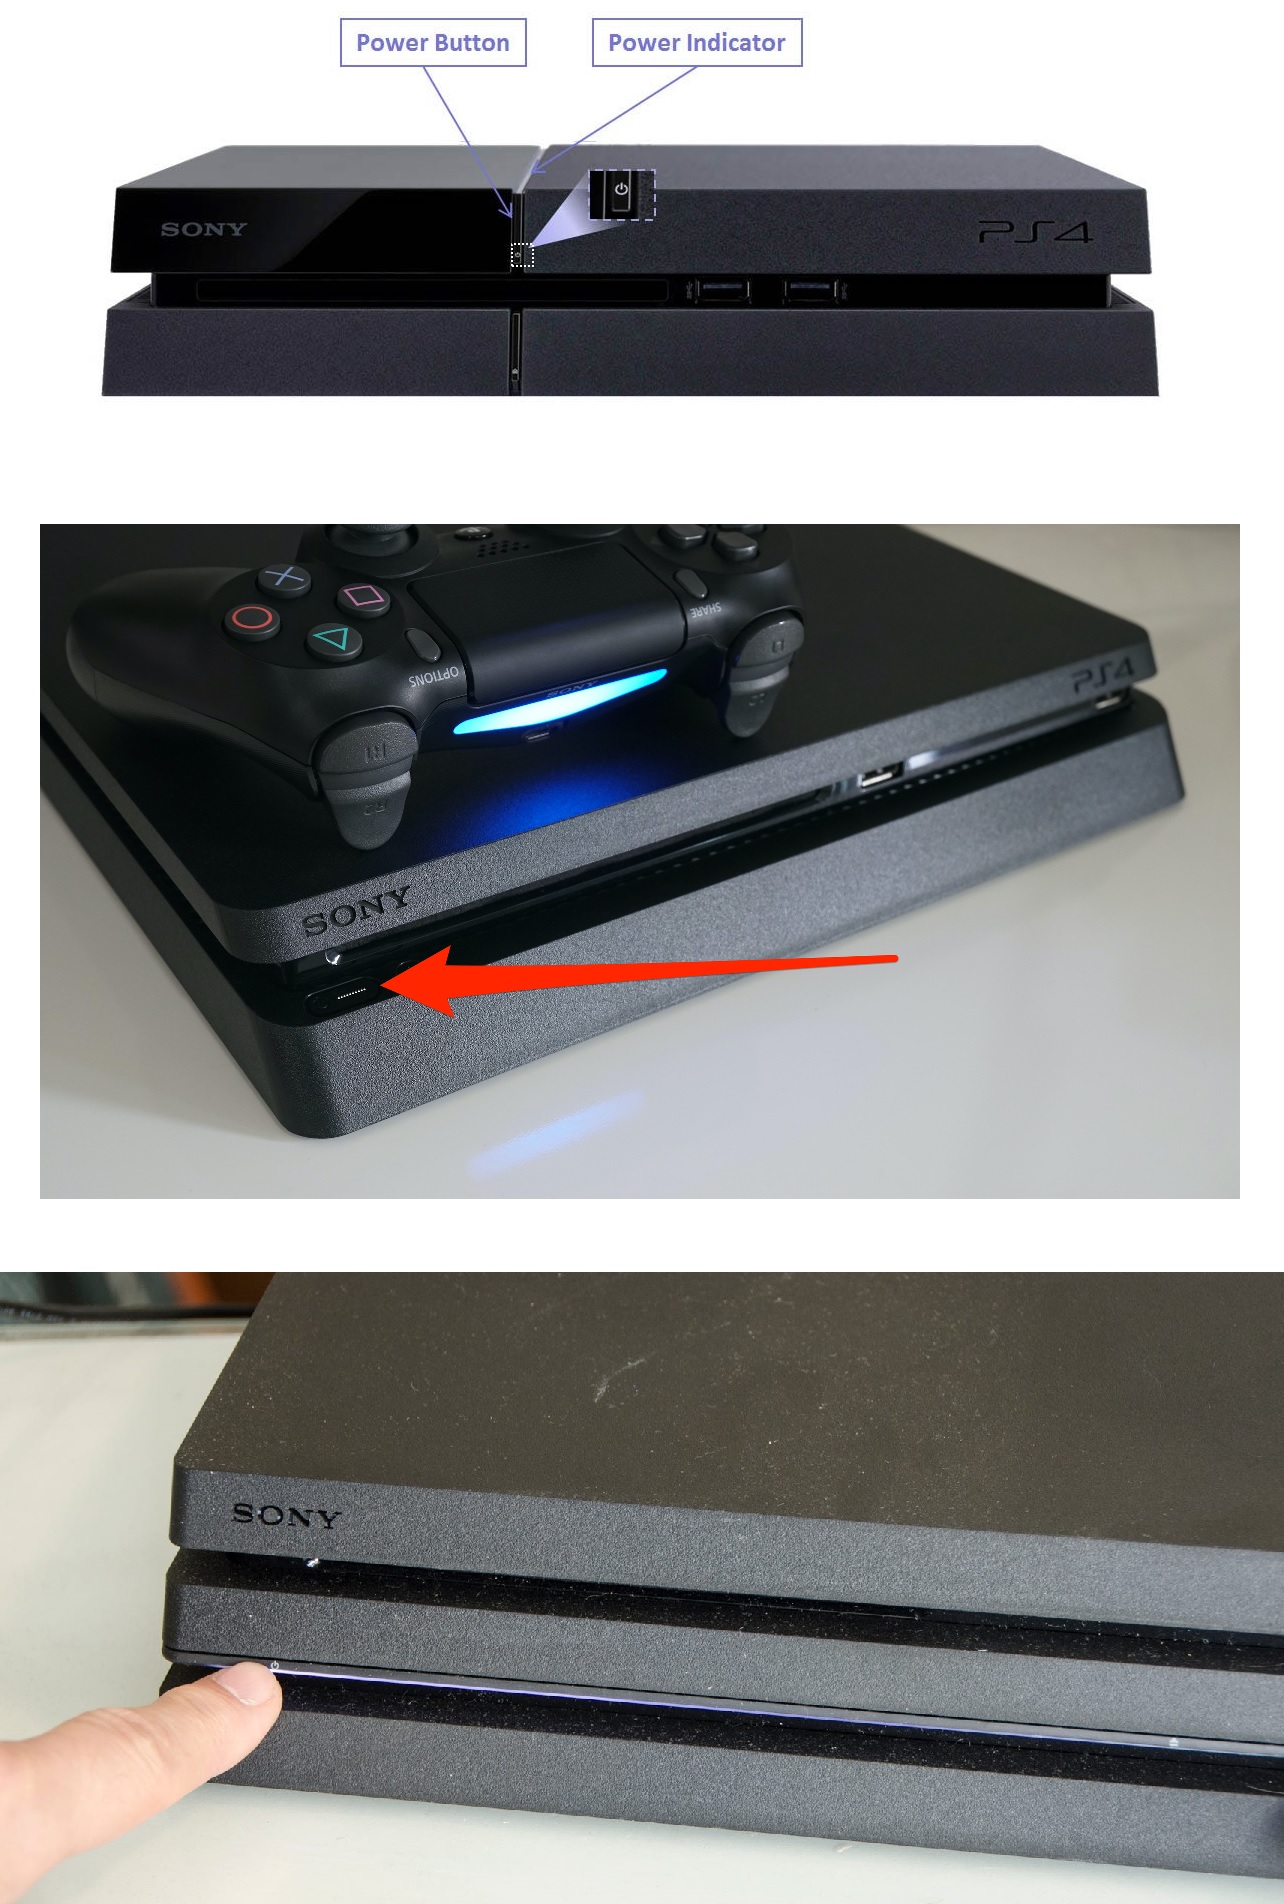 Setup PS4 power button location in all PS4 models